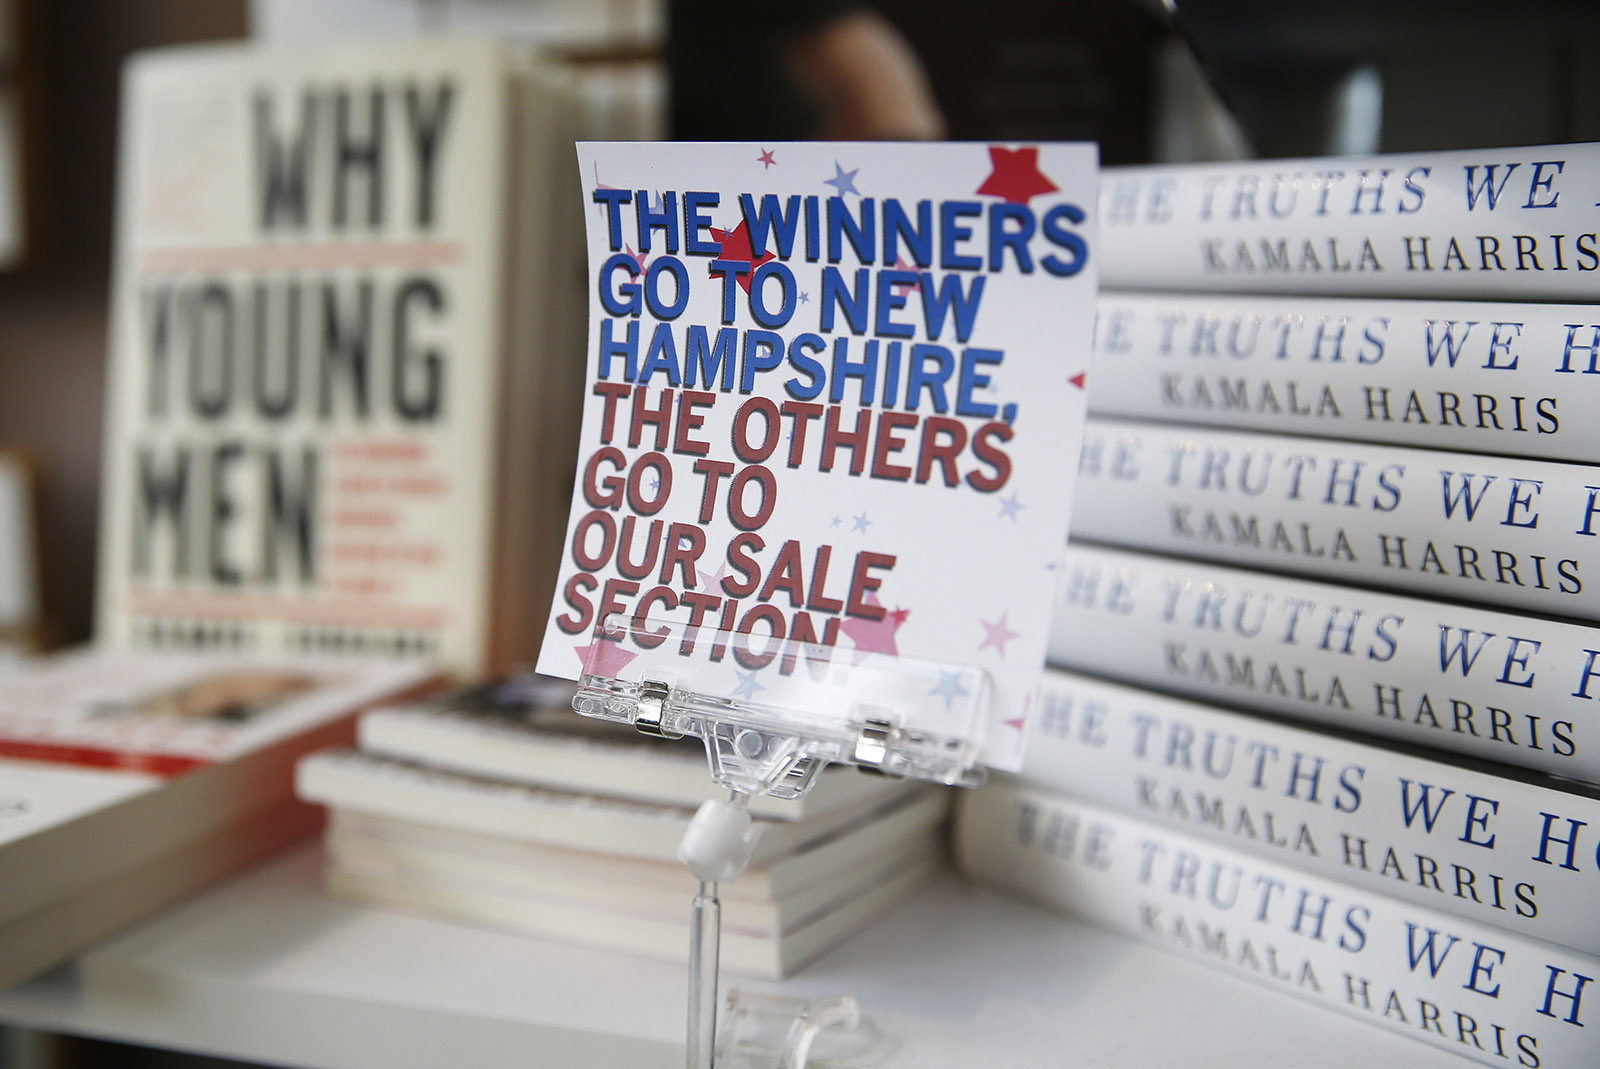 A book stall sign at a store in Des Moines, Iowa, the day of the Iowa caucuses, February 3, 2020